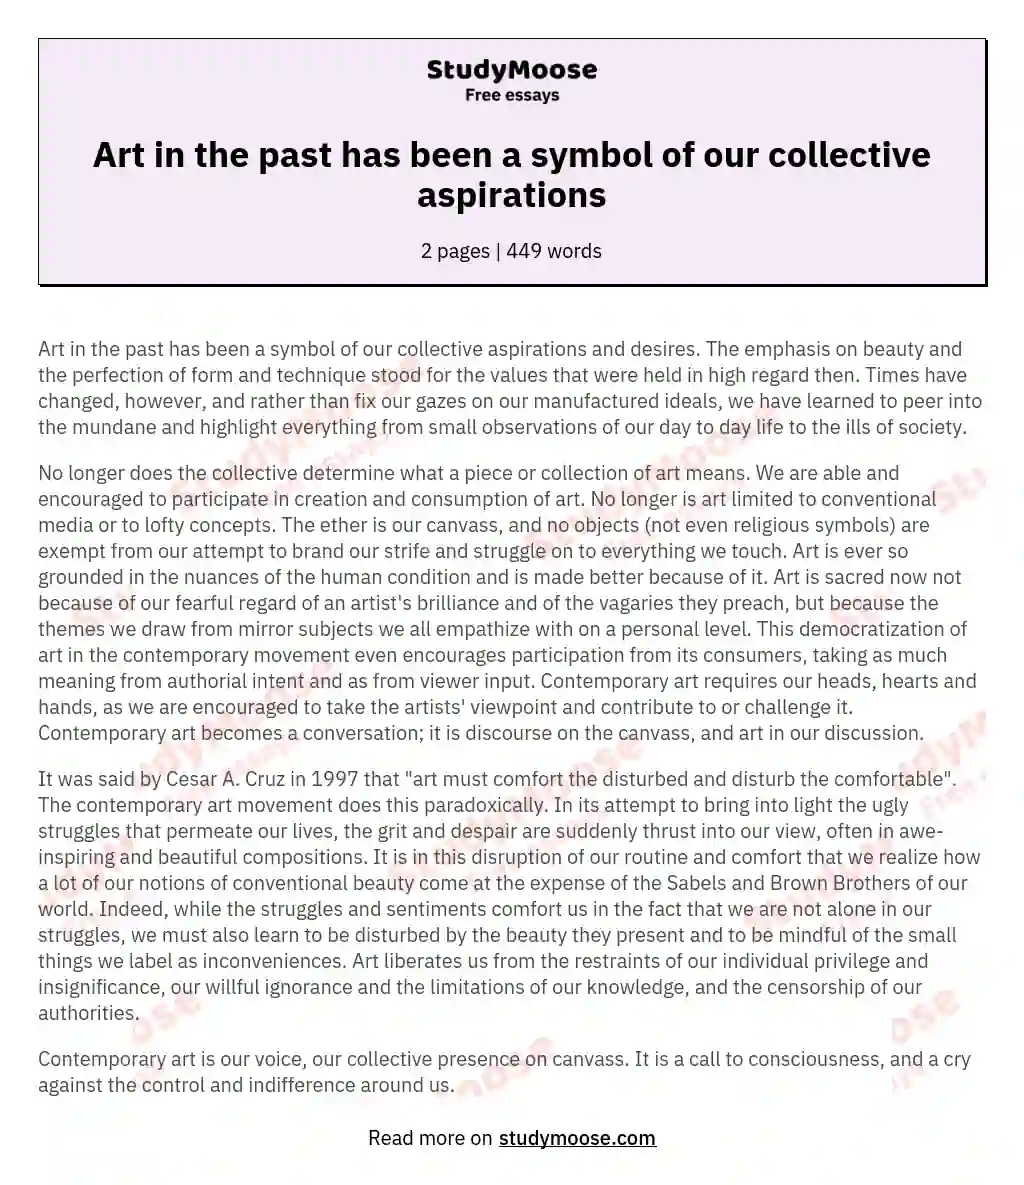 Art in the past has been a symbol of our collective aspirations essay